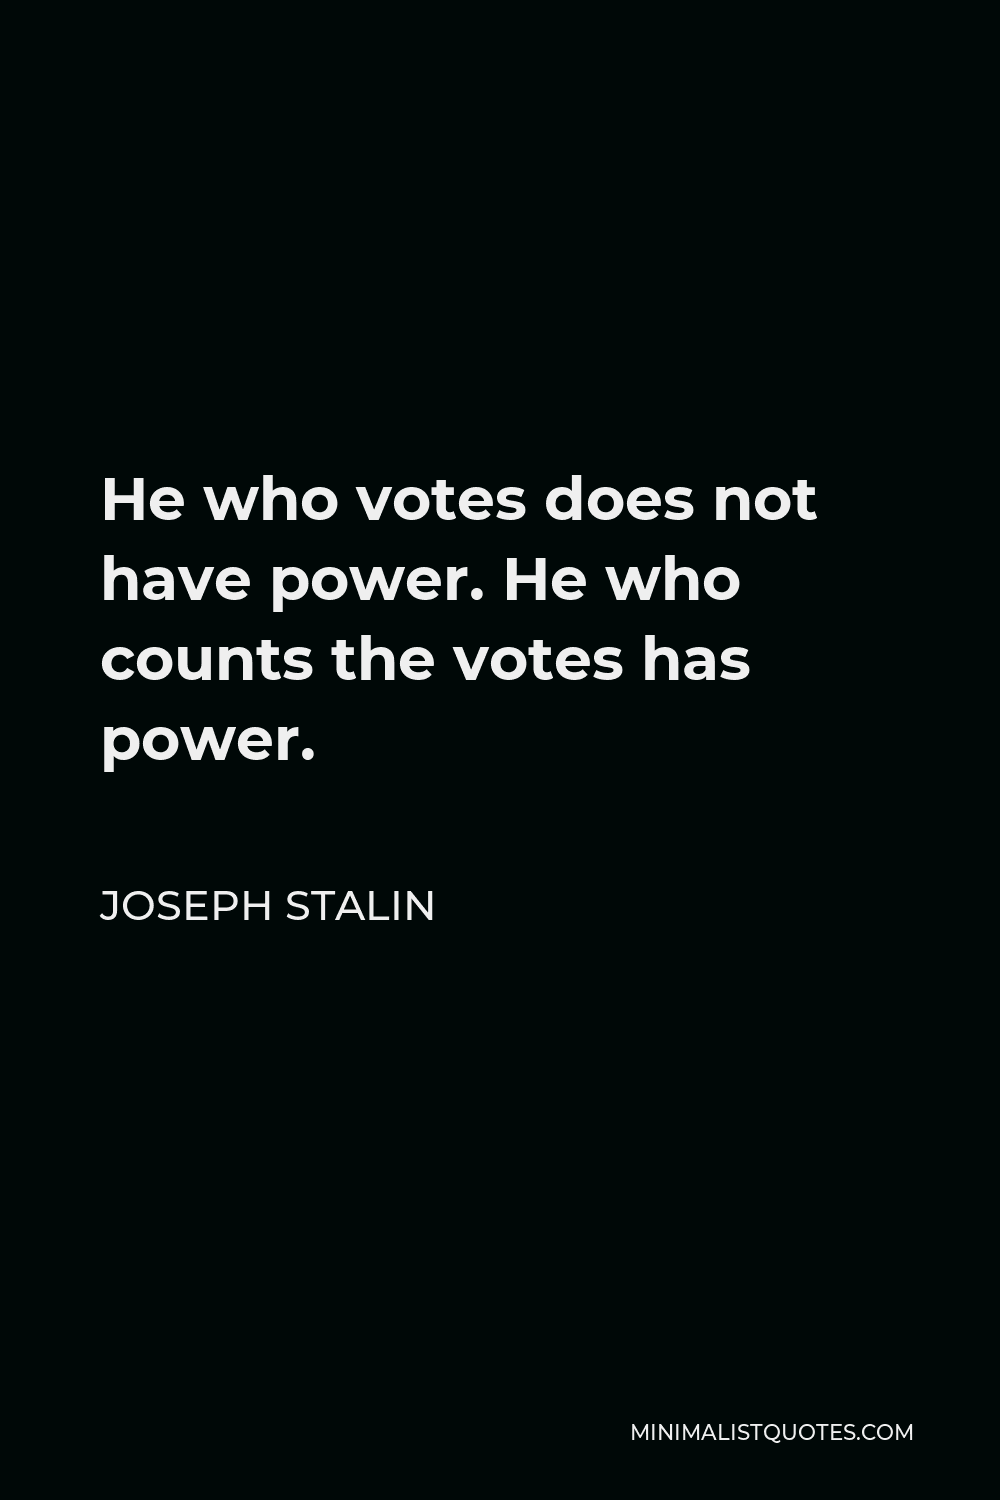 Joseph Stalin Quote - He who votes does not have power. He who counts the votes has power.